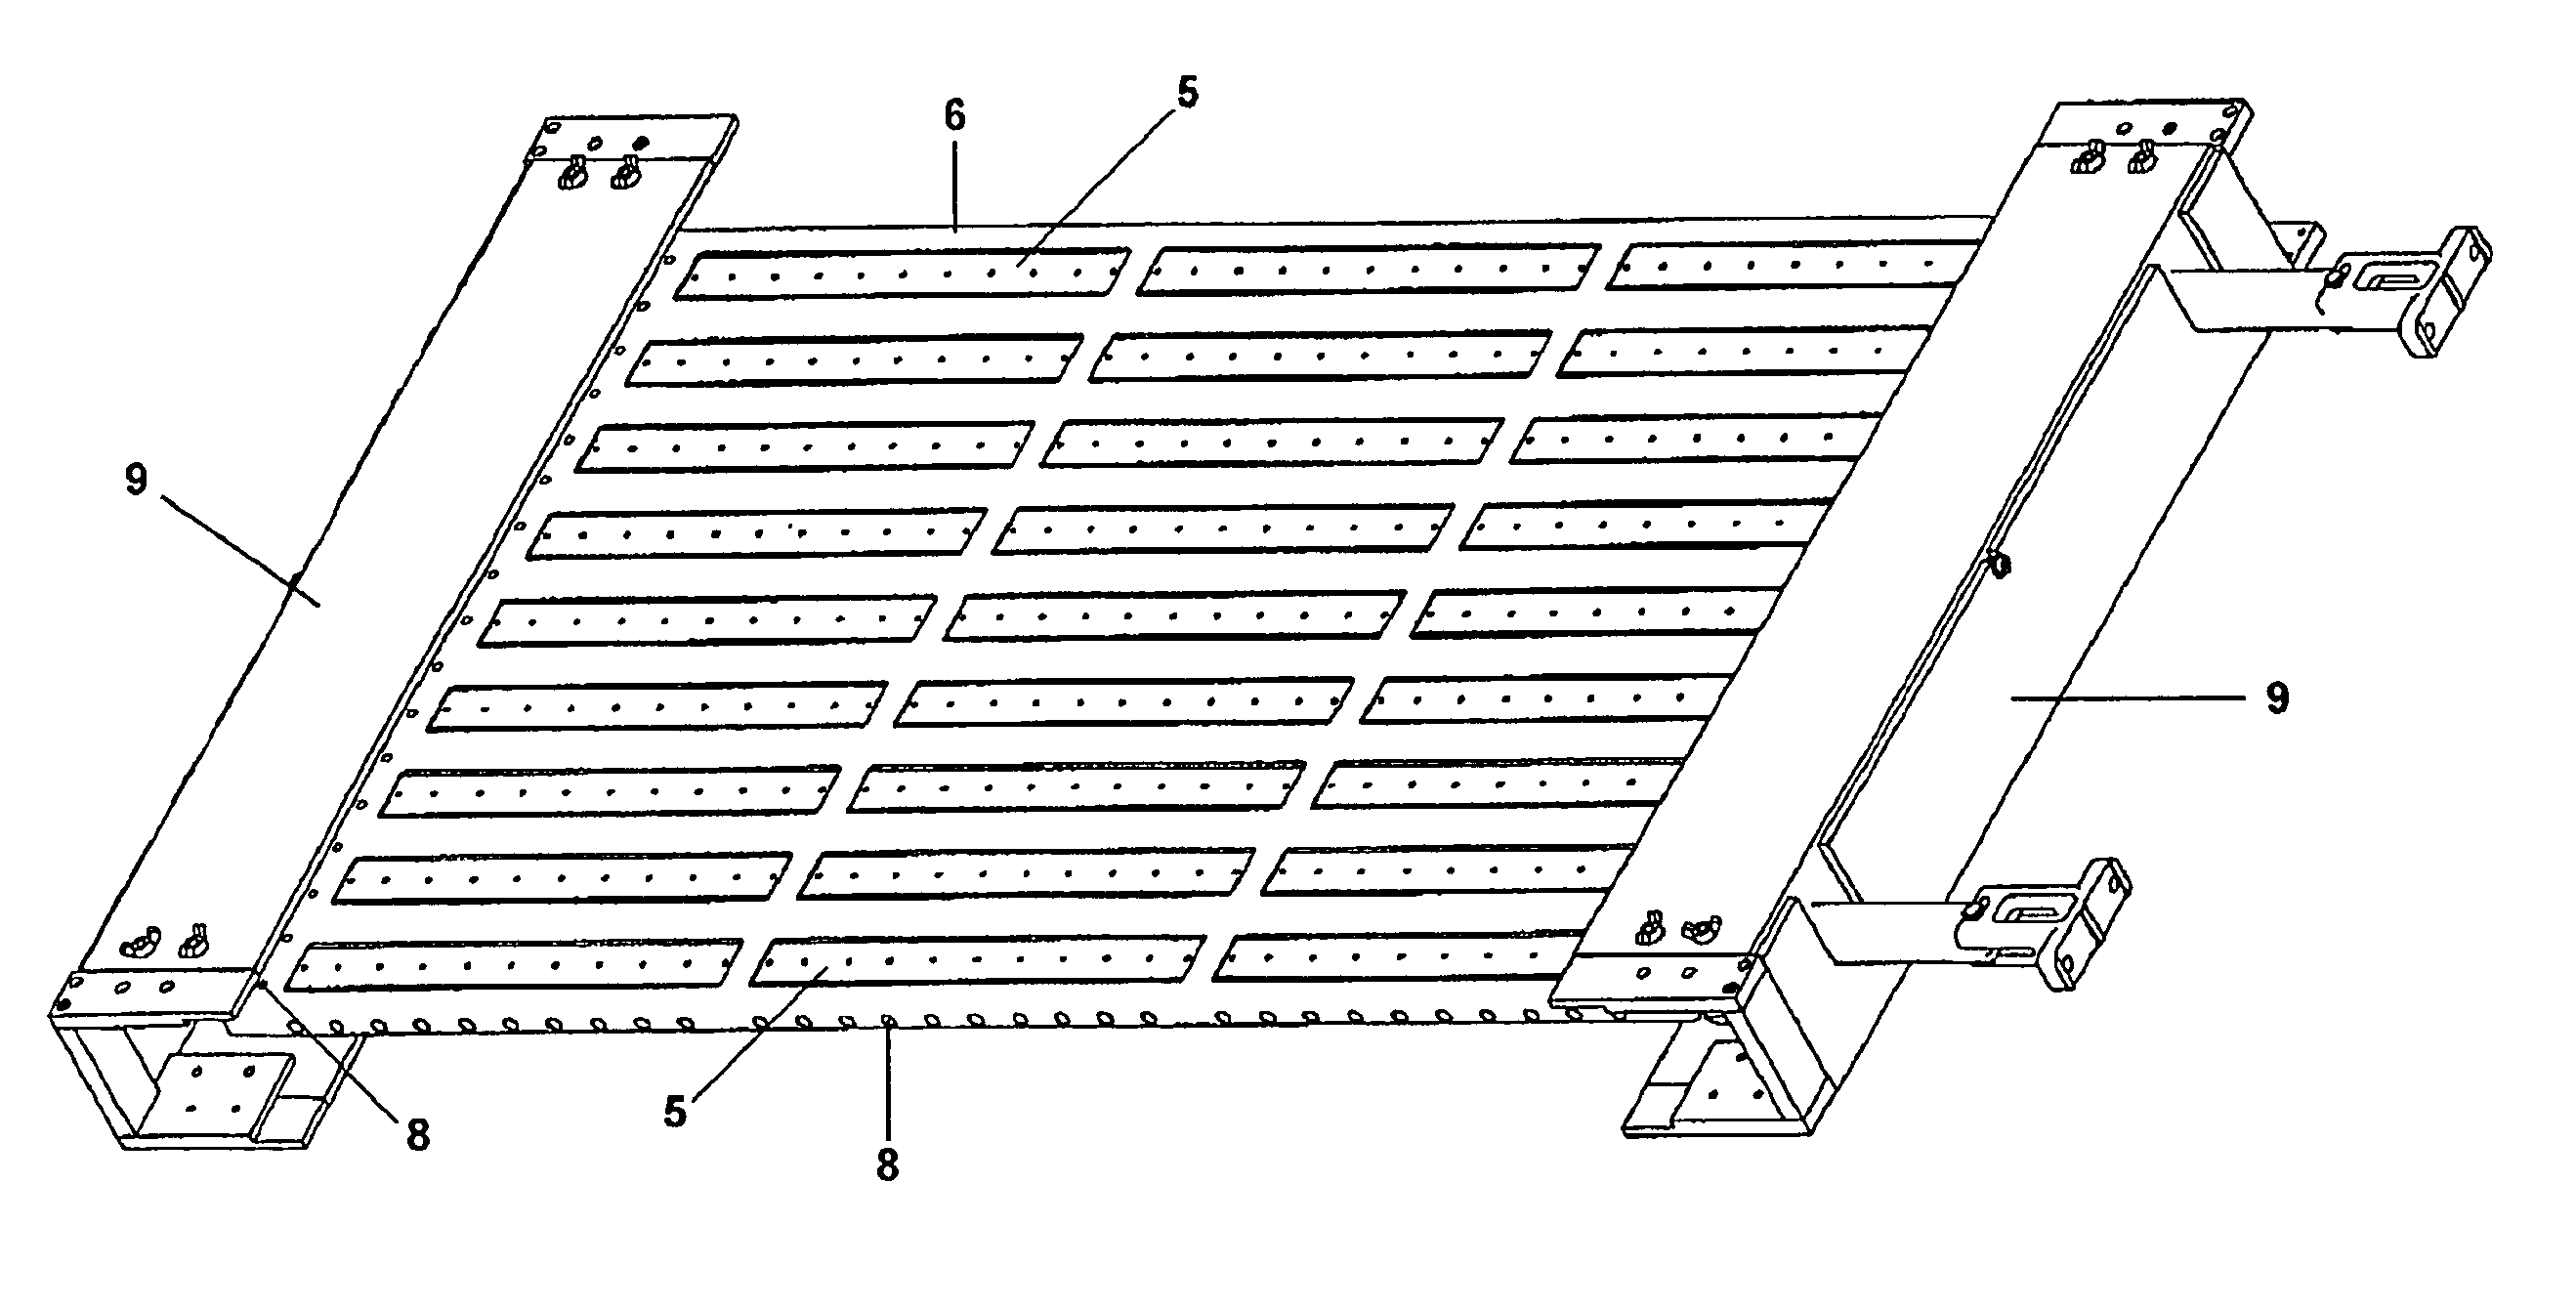 Pore cathode for the mass production of photovoltaic devices having increased conversion efficiency